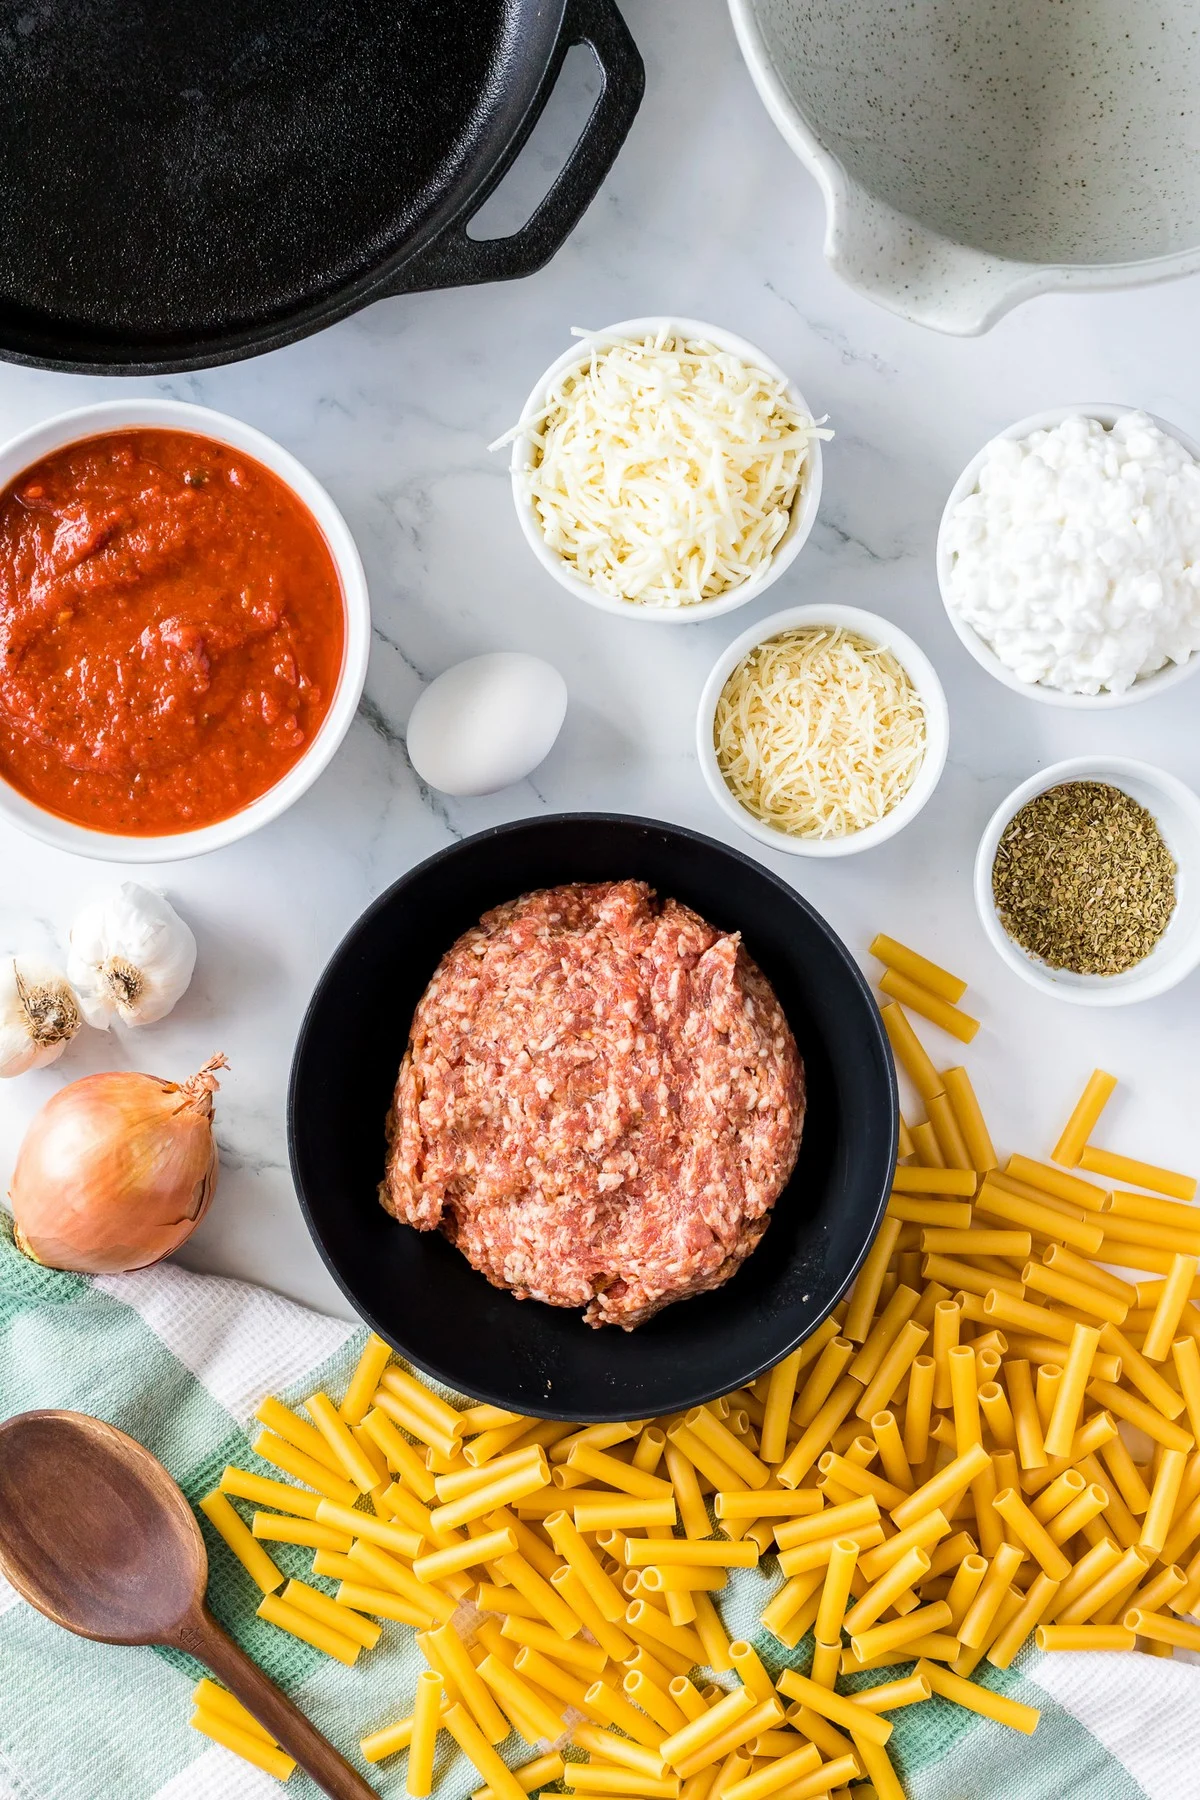 Ingredients for baked ziti